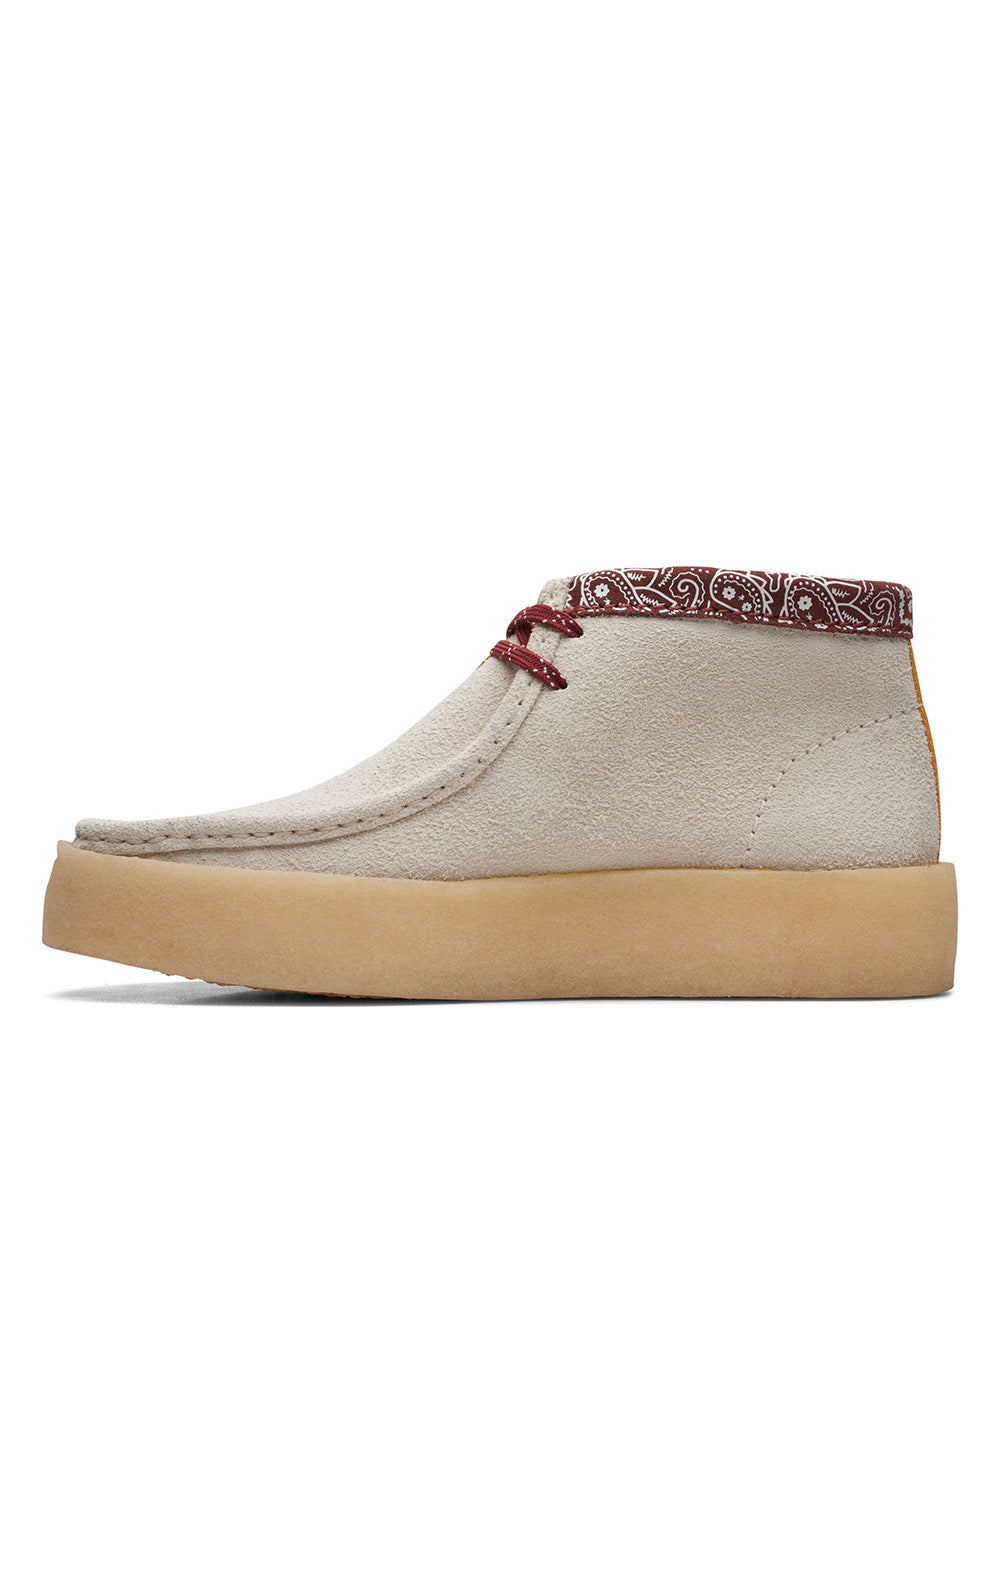 Clarks Originals Wallabee Cup Boots Men's White Interest Suede 26167977, iconic design in high-quality white suede material